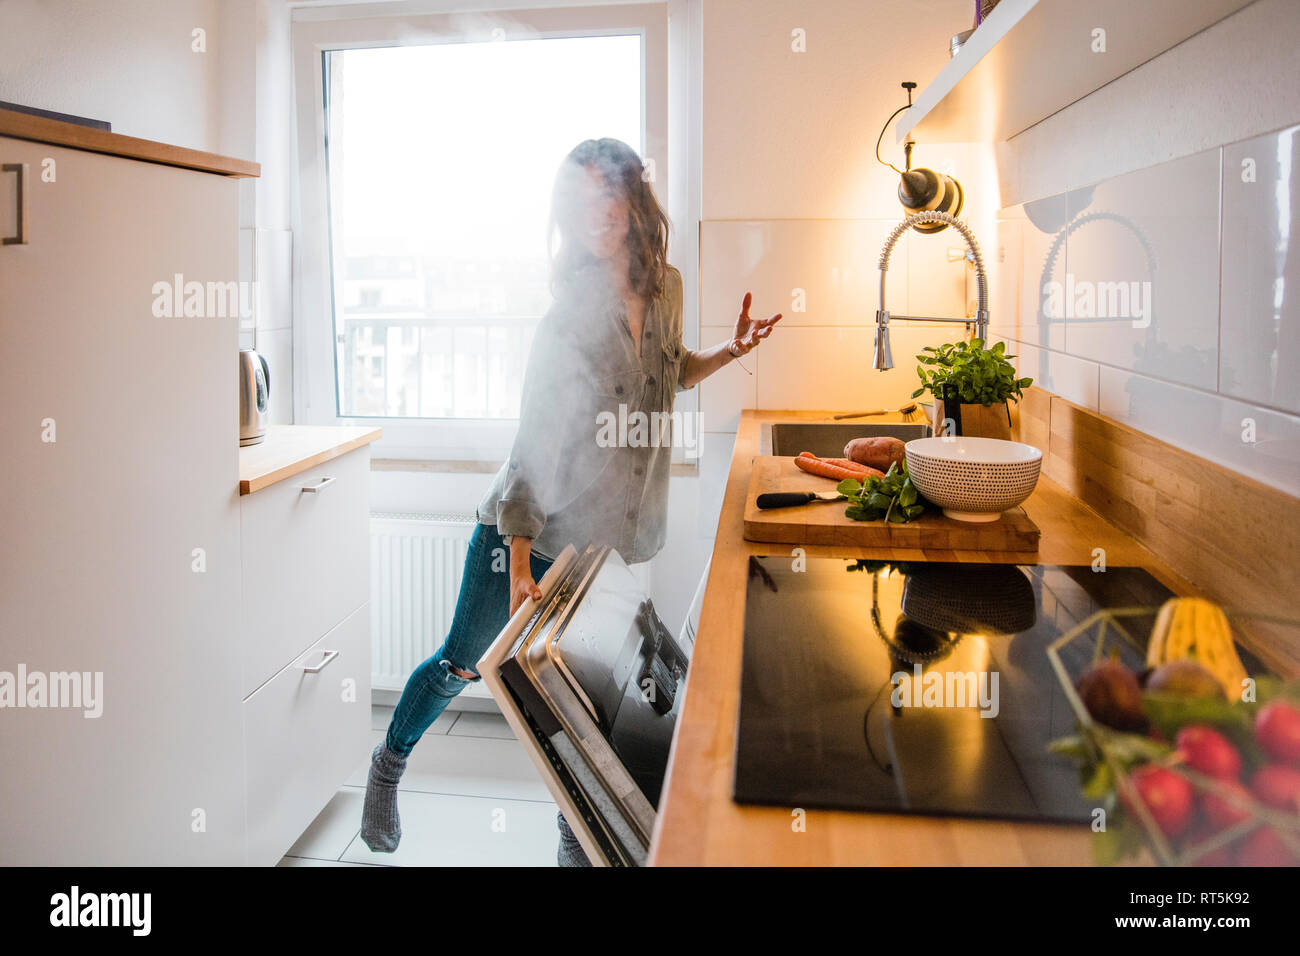 Woman opening steaming dish washer in the kitchen Stock Photo